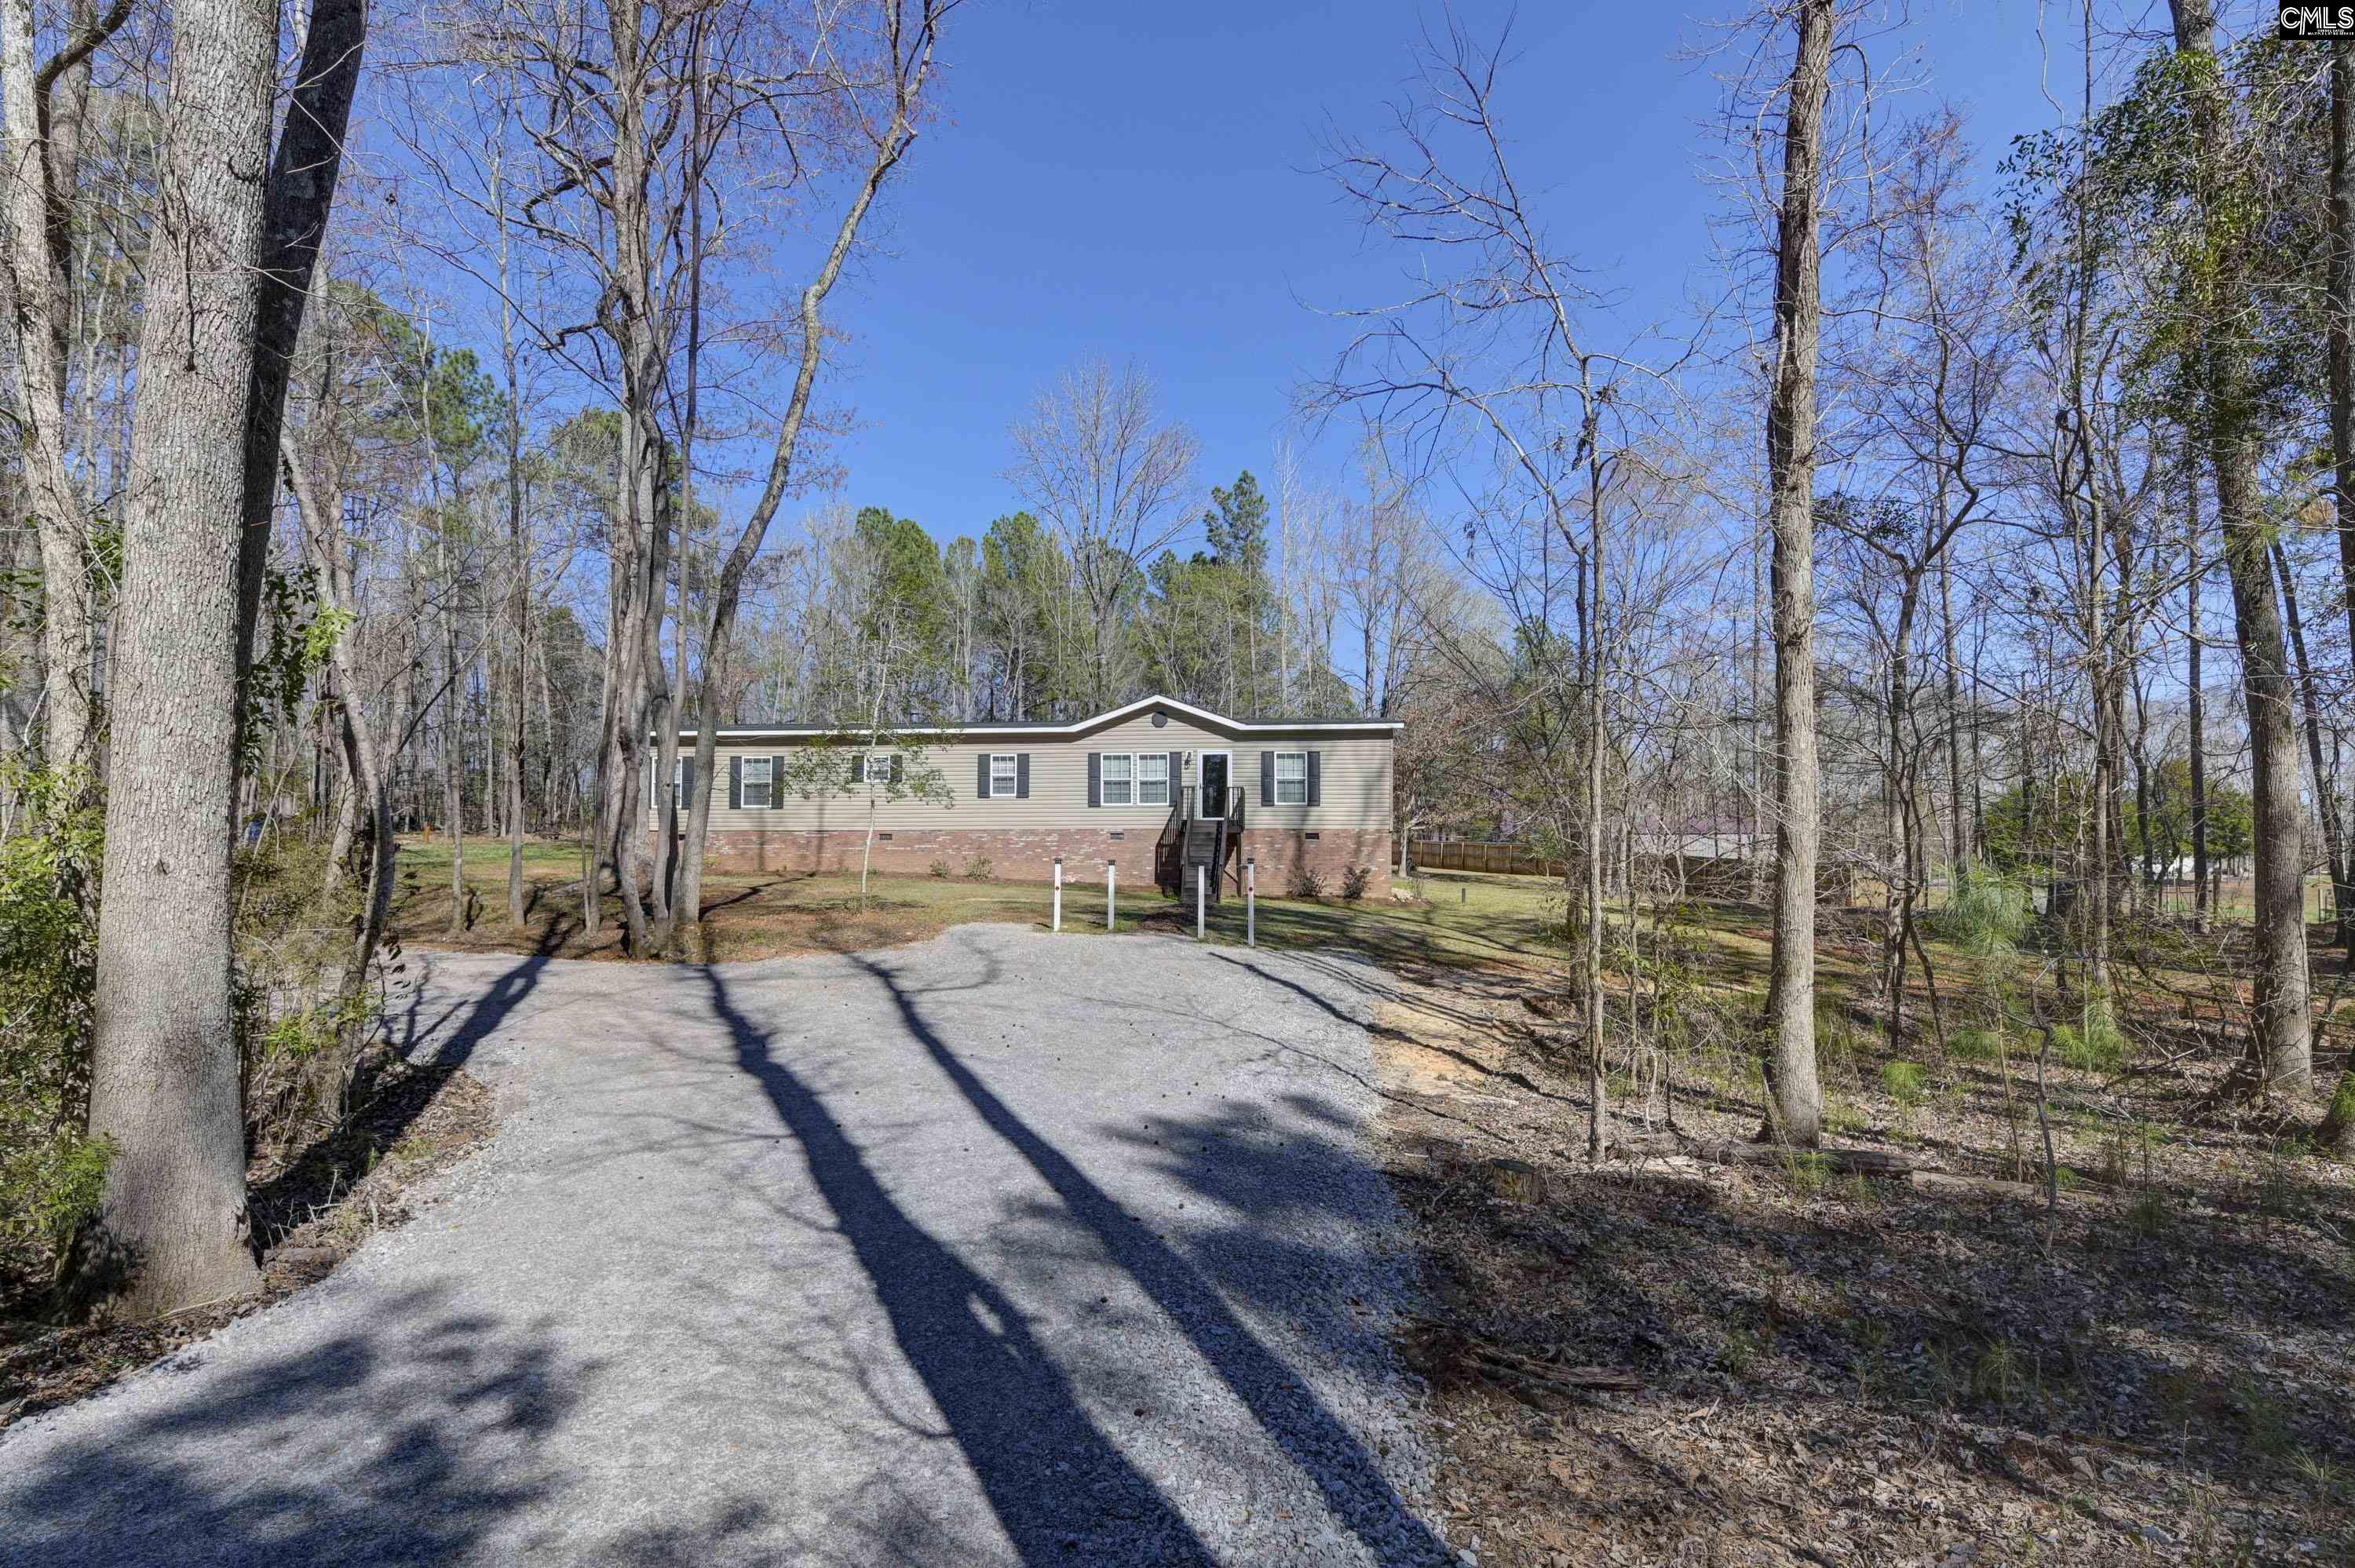 256 Old Shealy Chapin, SC 29036